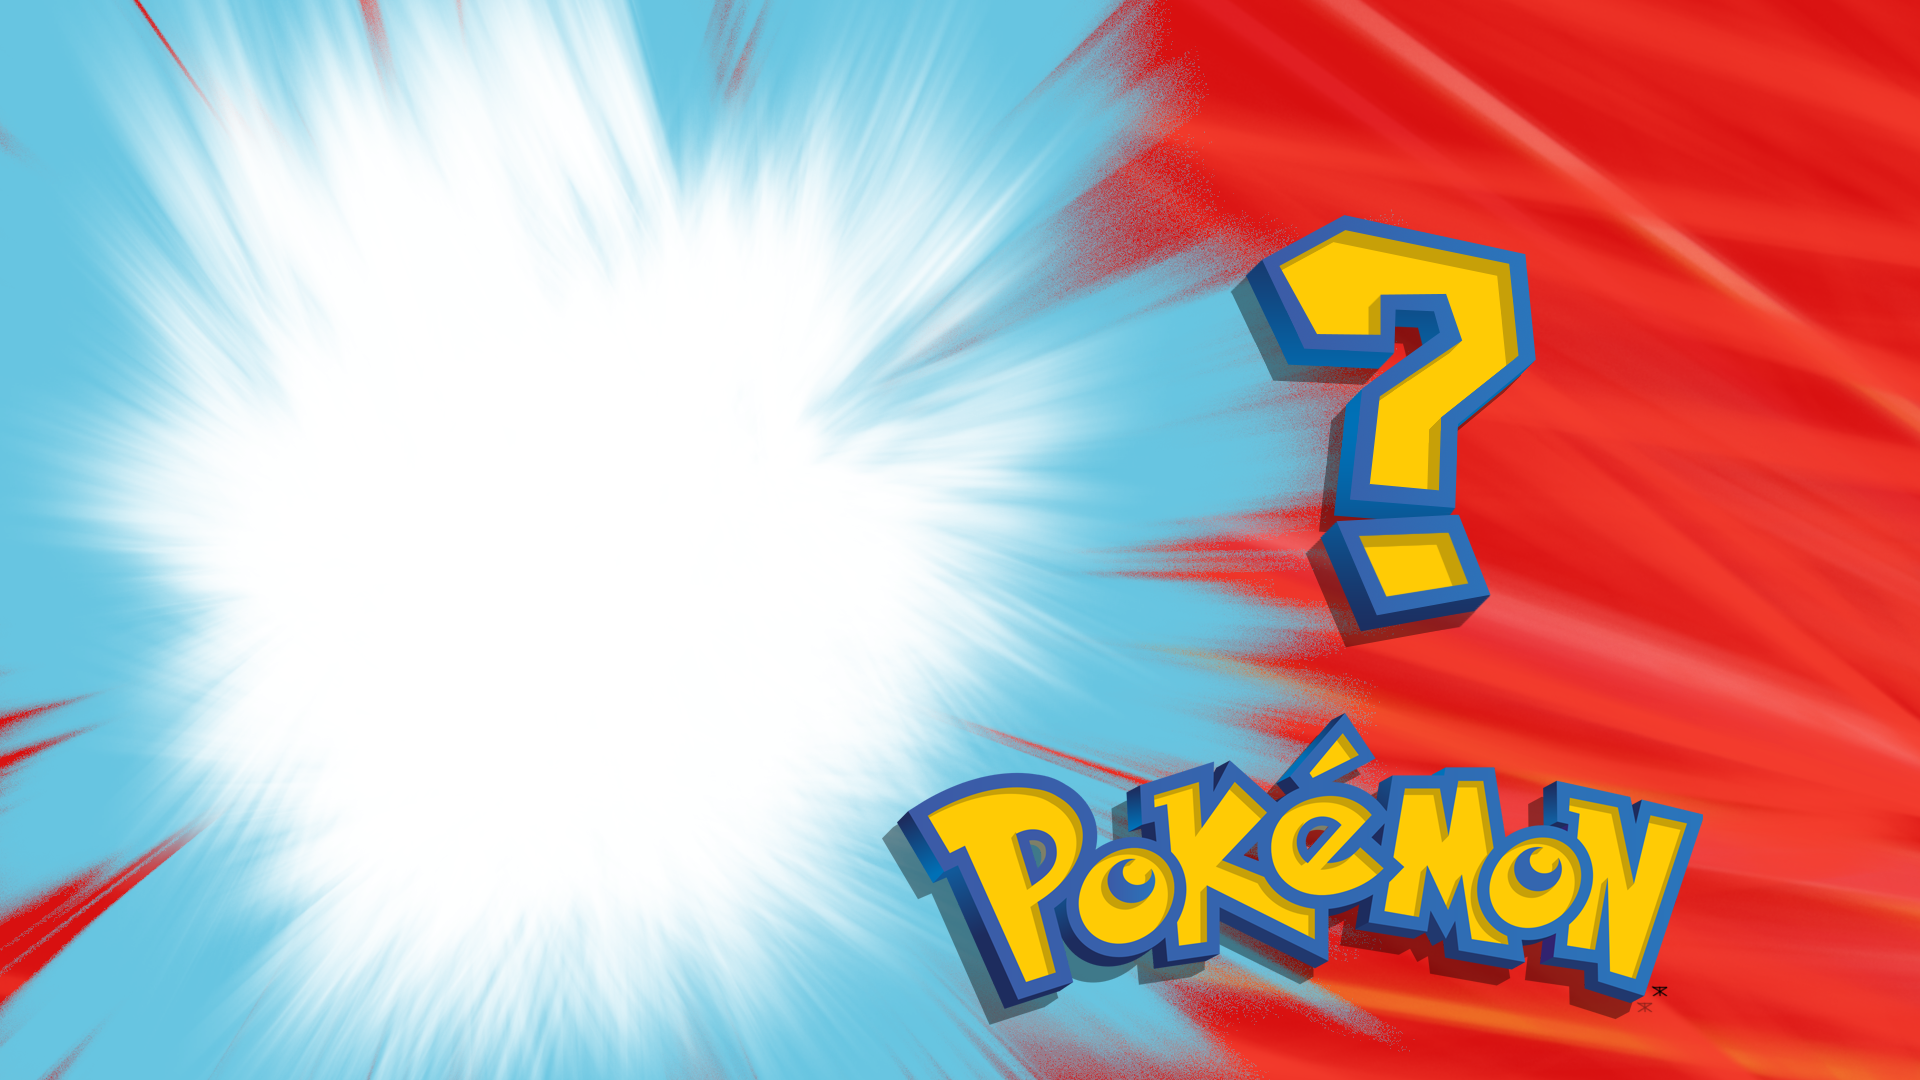 Who is that pokemon?